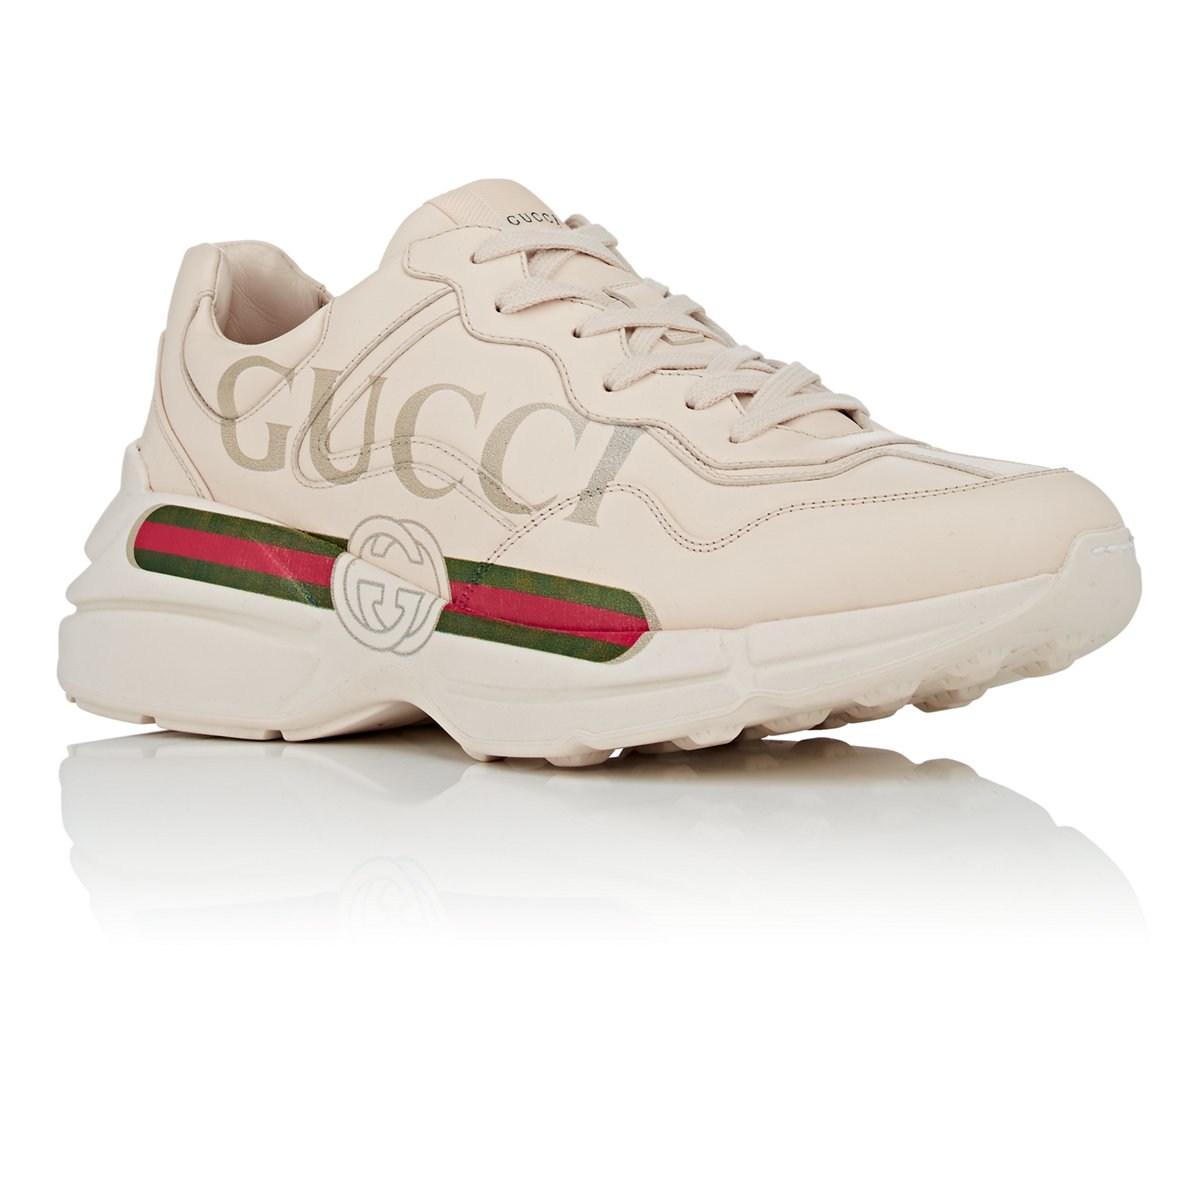 Gucci Rhyton Leather Sneakers in Ivory (White) - Lyst